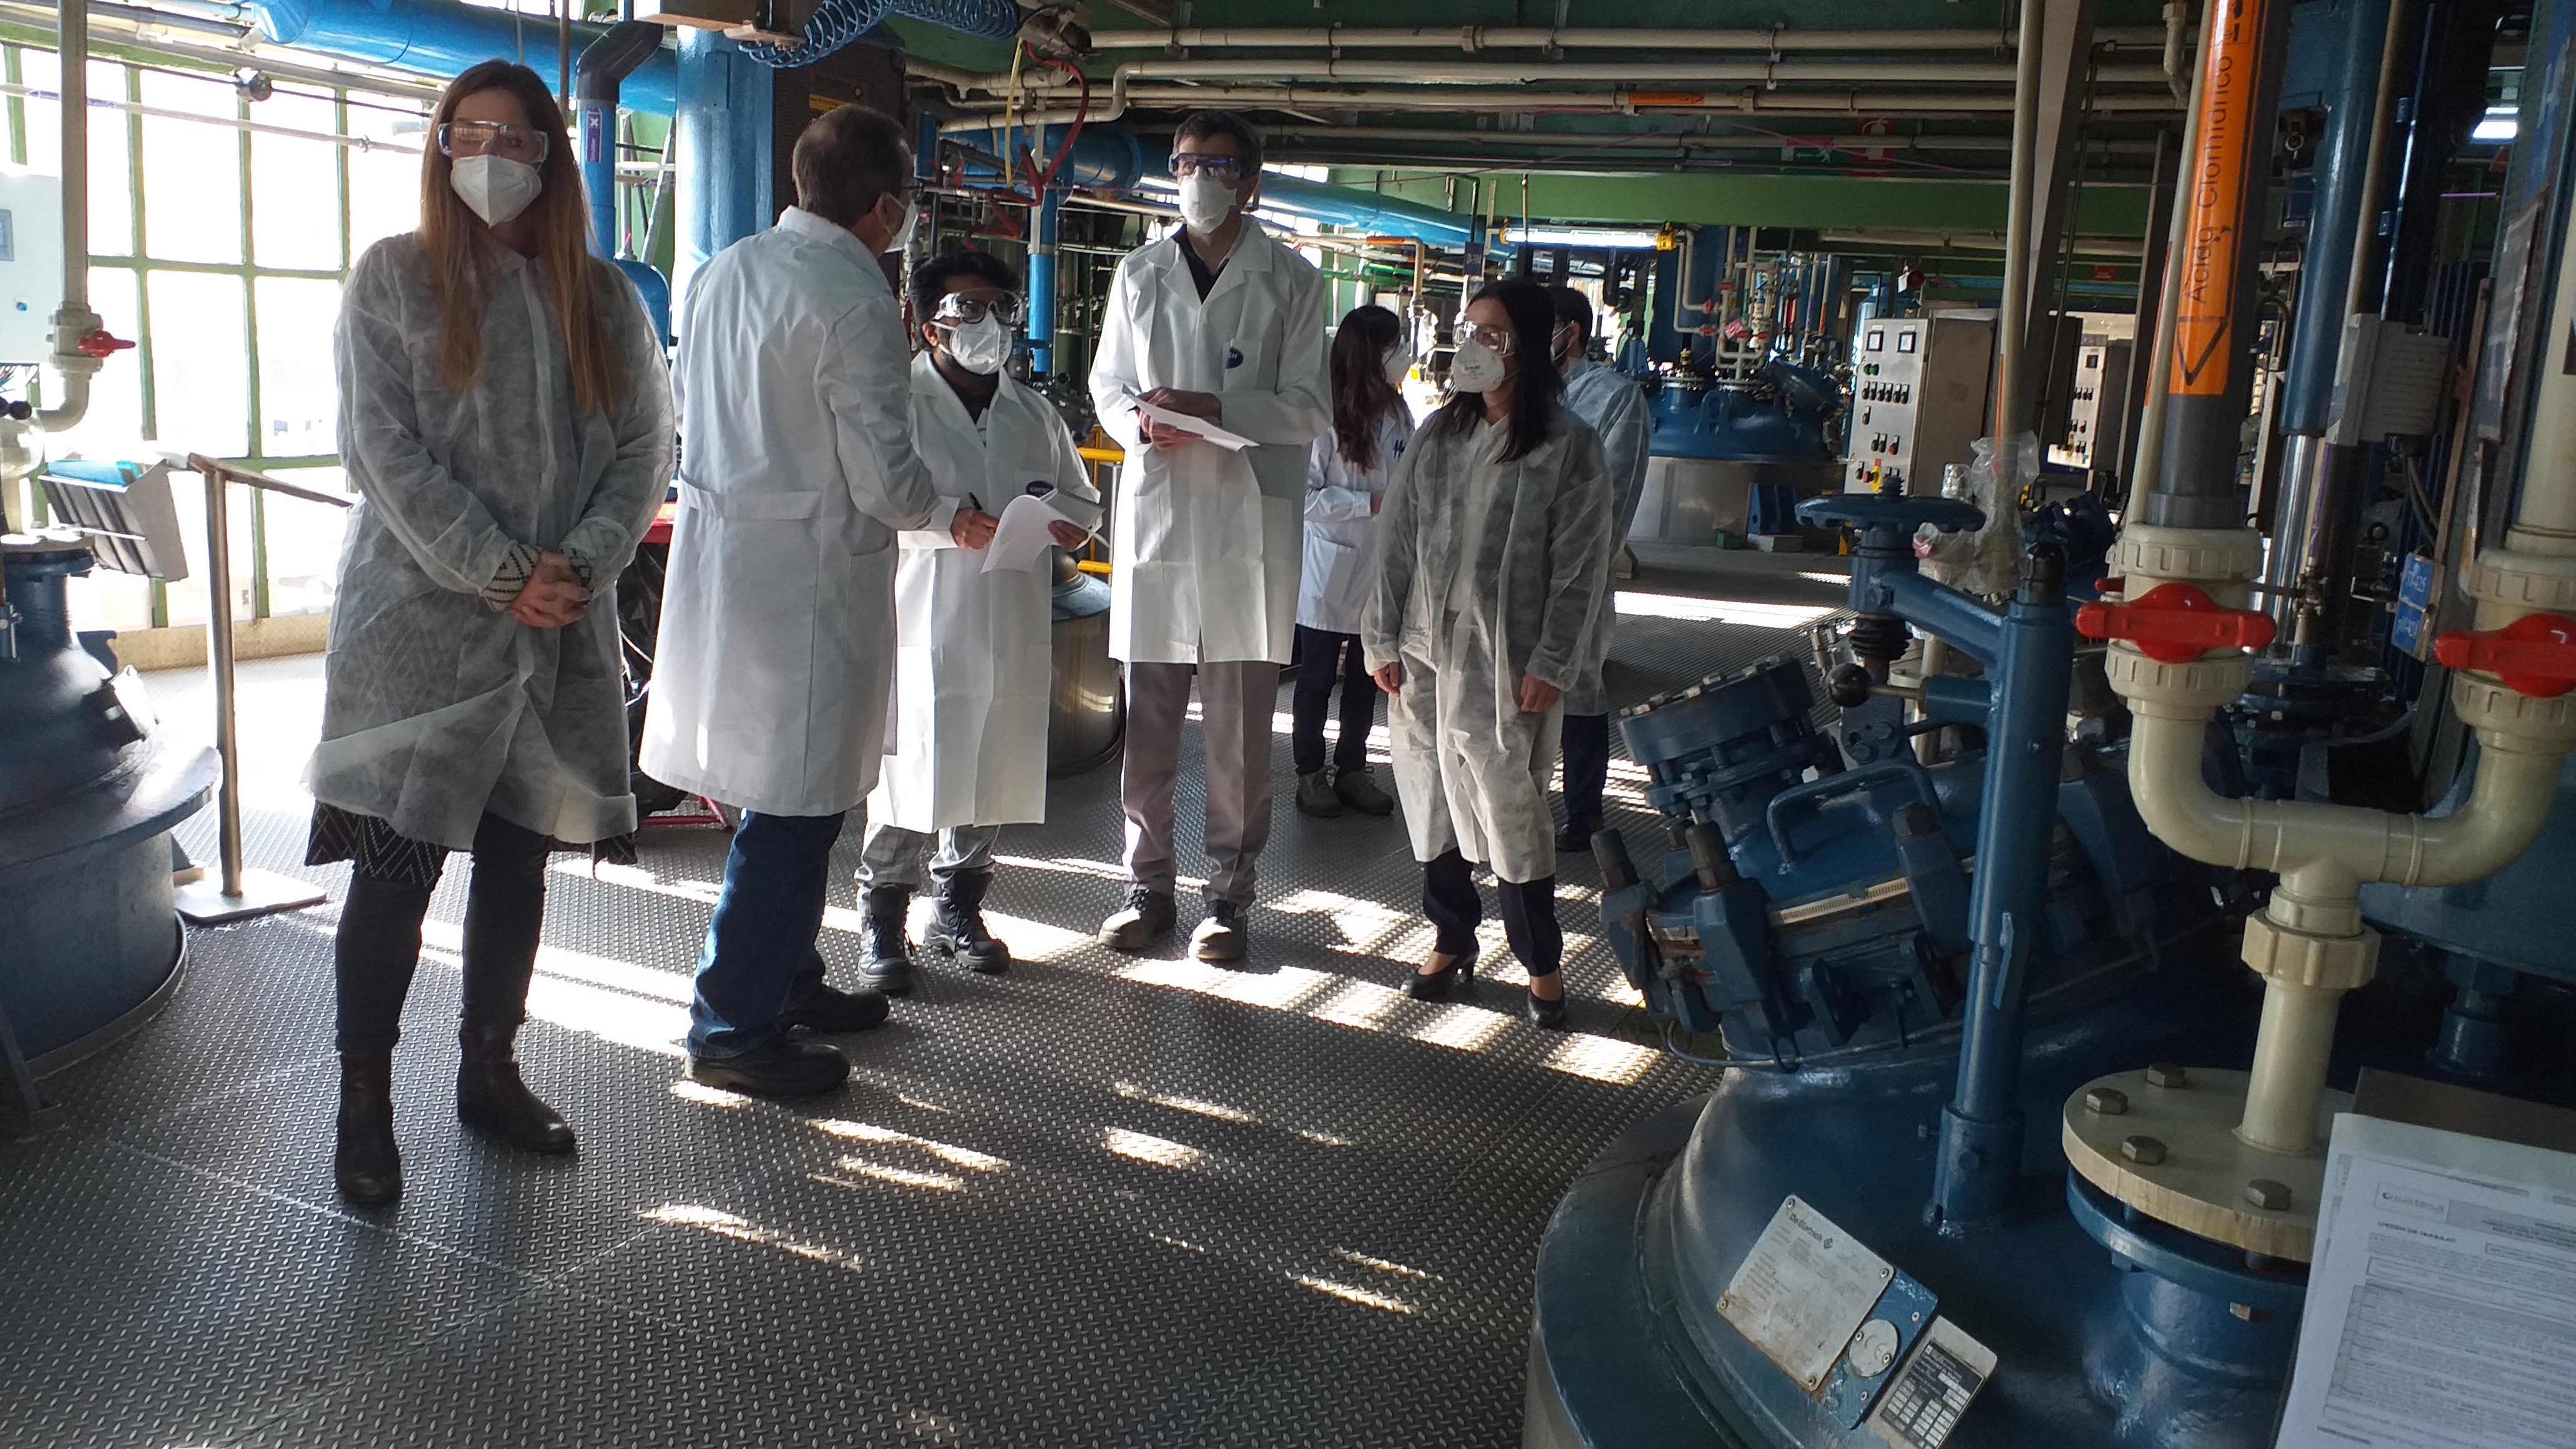 Inspecting a pharmaceutical company in Madrid